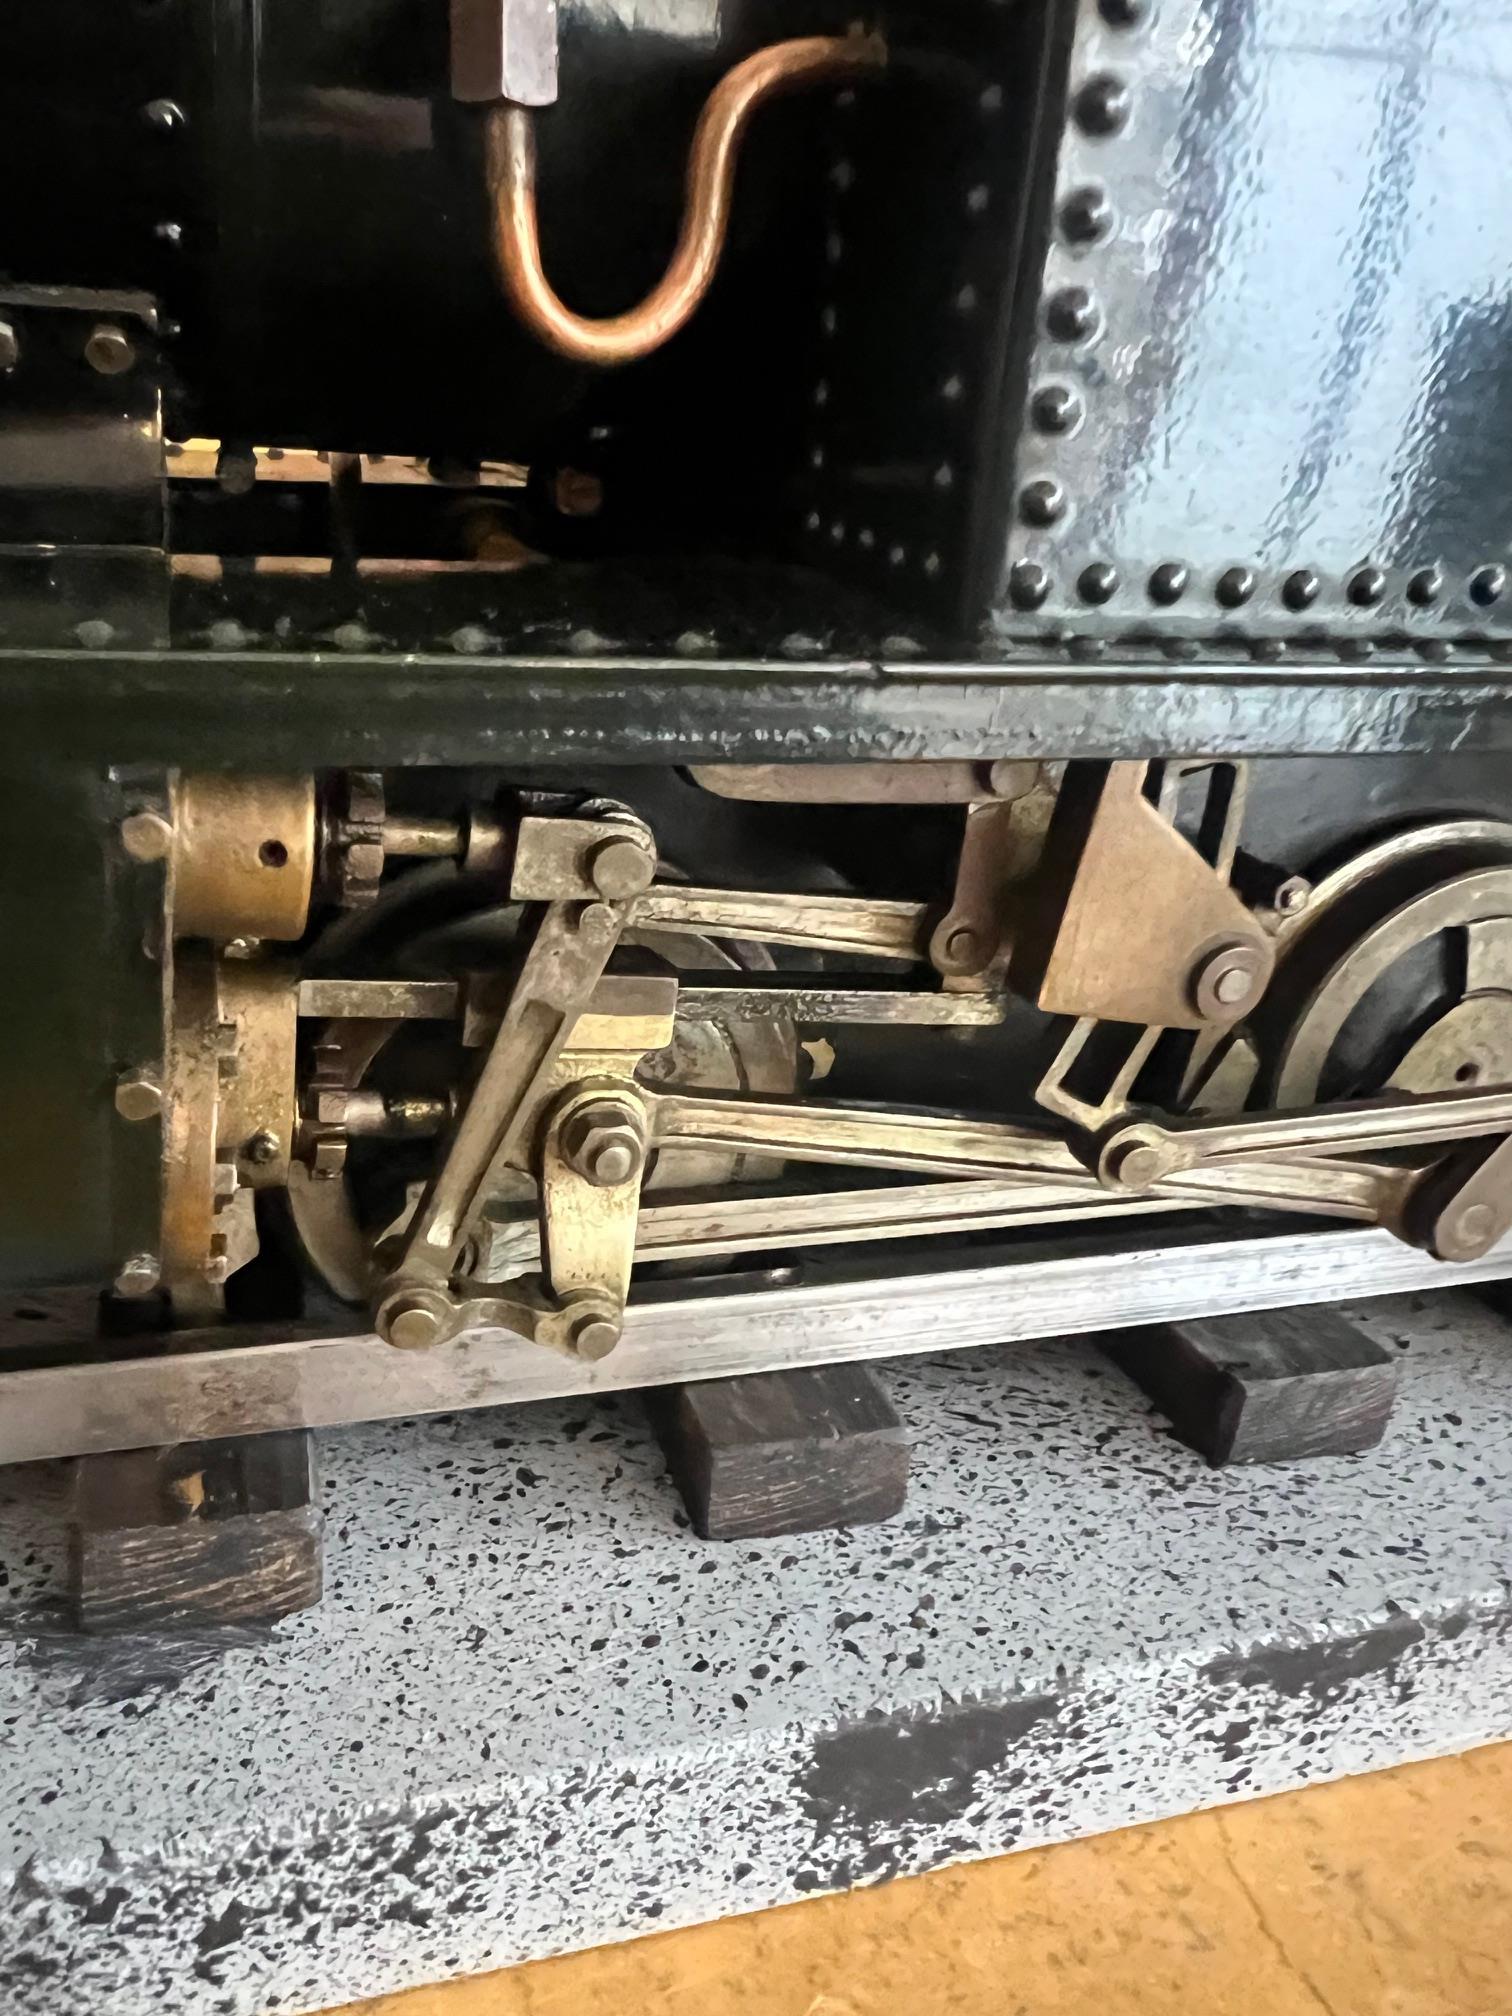 A FULL WORKING MODEL OF A STEAM TRAIN - Image 10 of 22